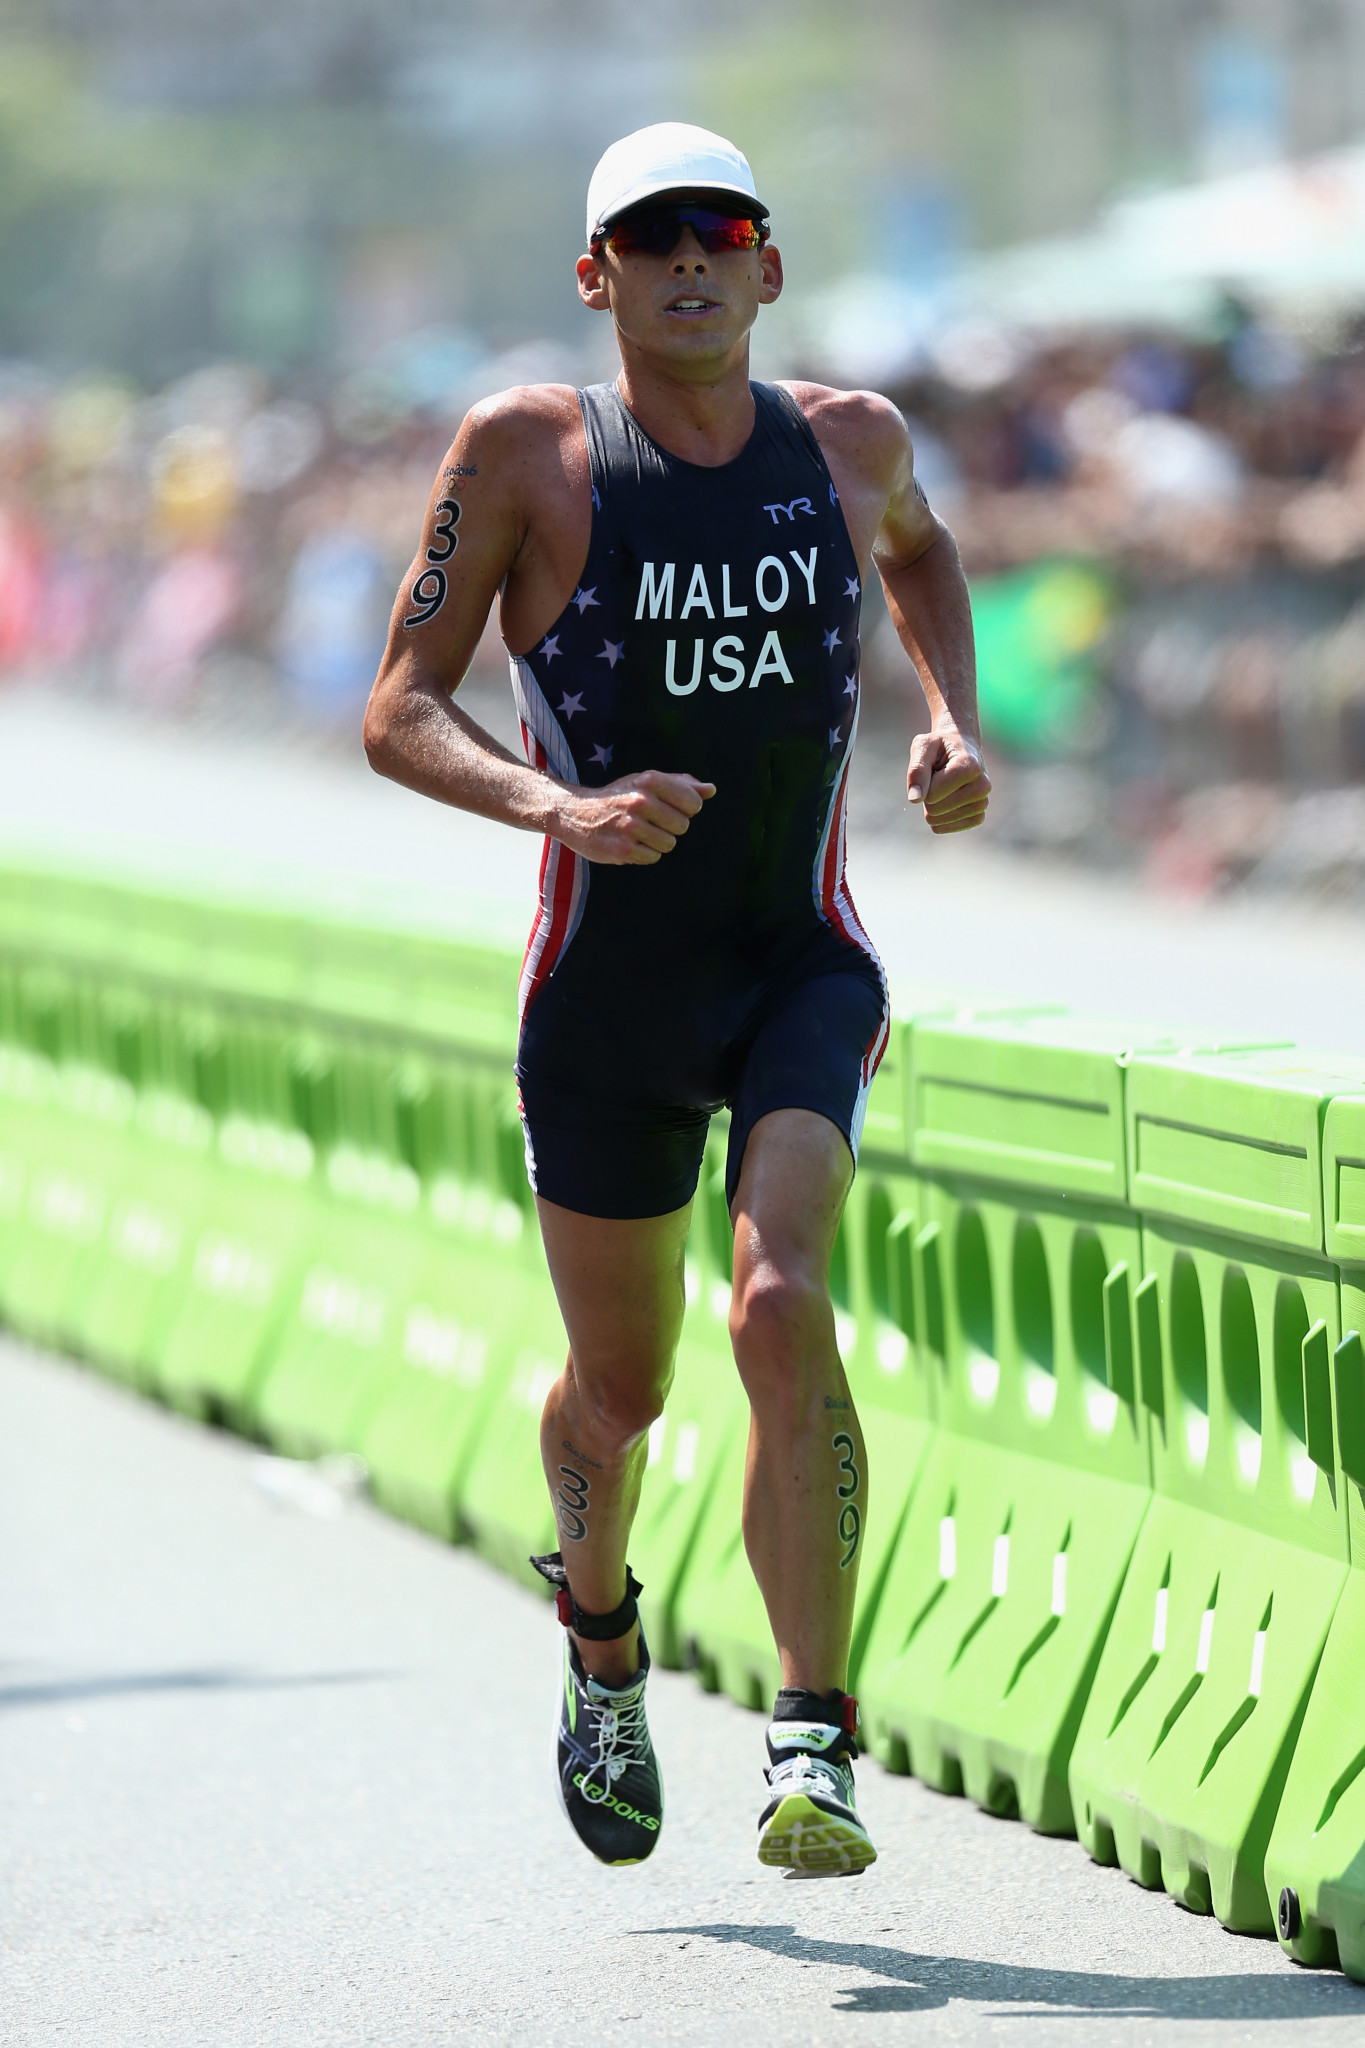 Joe Maloy was the top American man at the Rio 2016 Olympic Games with a 23rd-place finish ©Getty Images